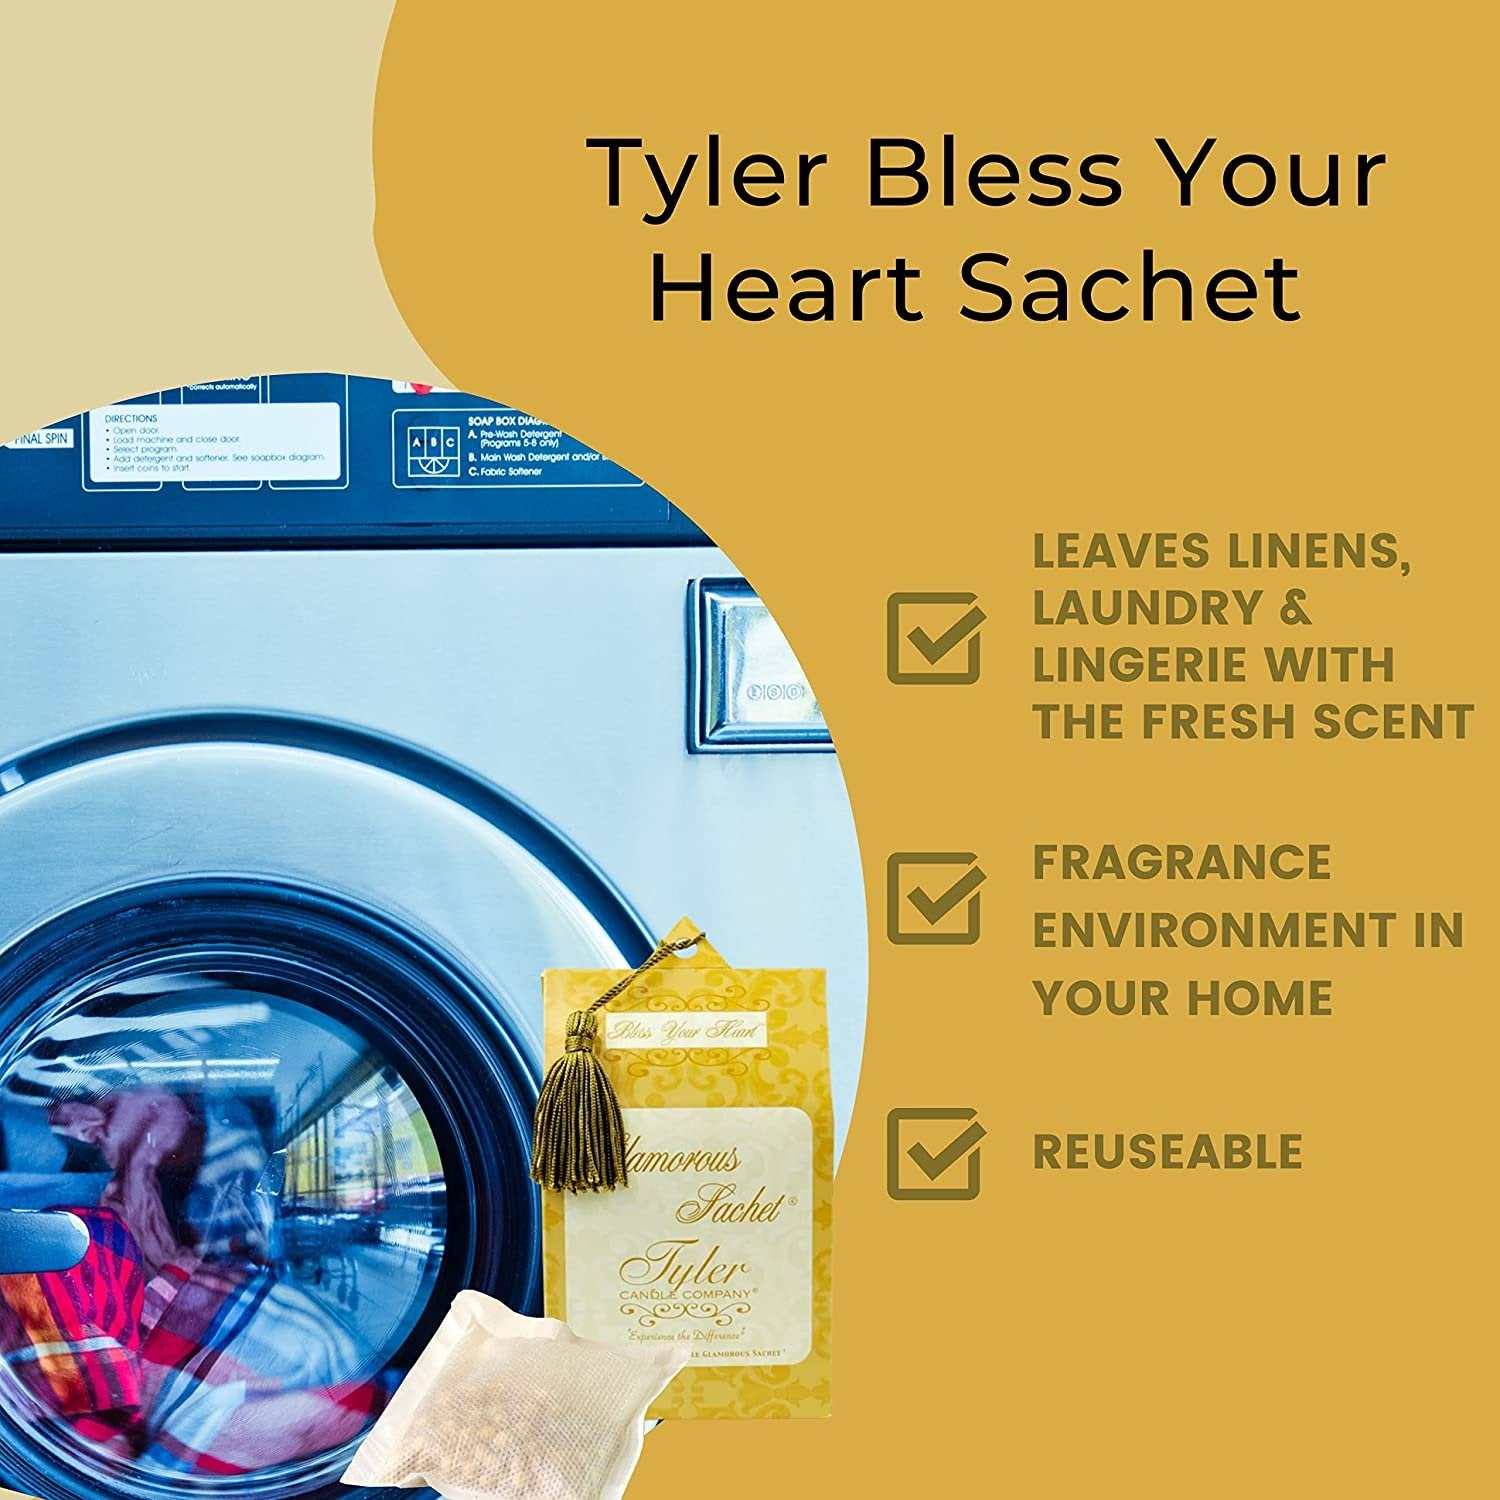 Tyler Candle Company Bless Your Heart Dryer Sheet Sachets - Glamorous Reusable Dryer Sheets - Sachets for Drawers and Closets - 1 Pack, 4 Sachets, Dryer, Home, or Personal Sachet, with Bonus Key Chain